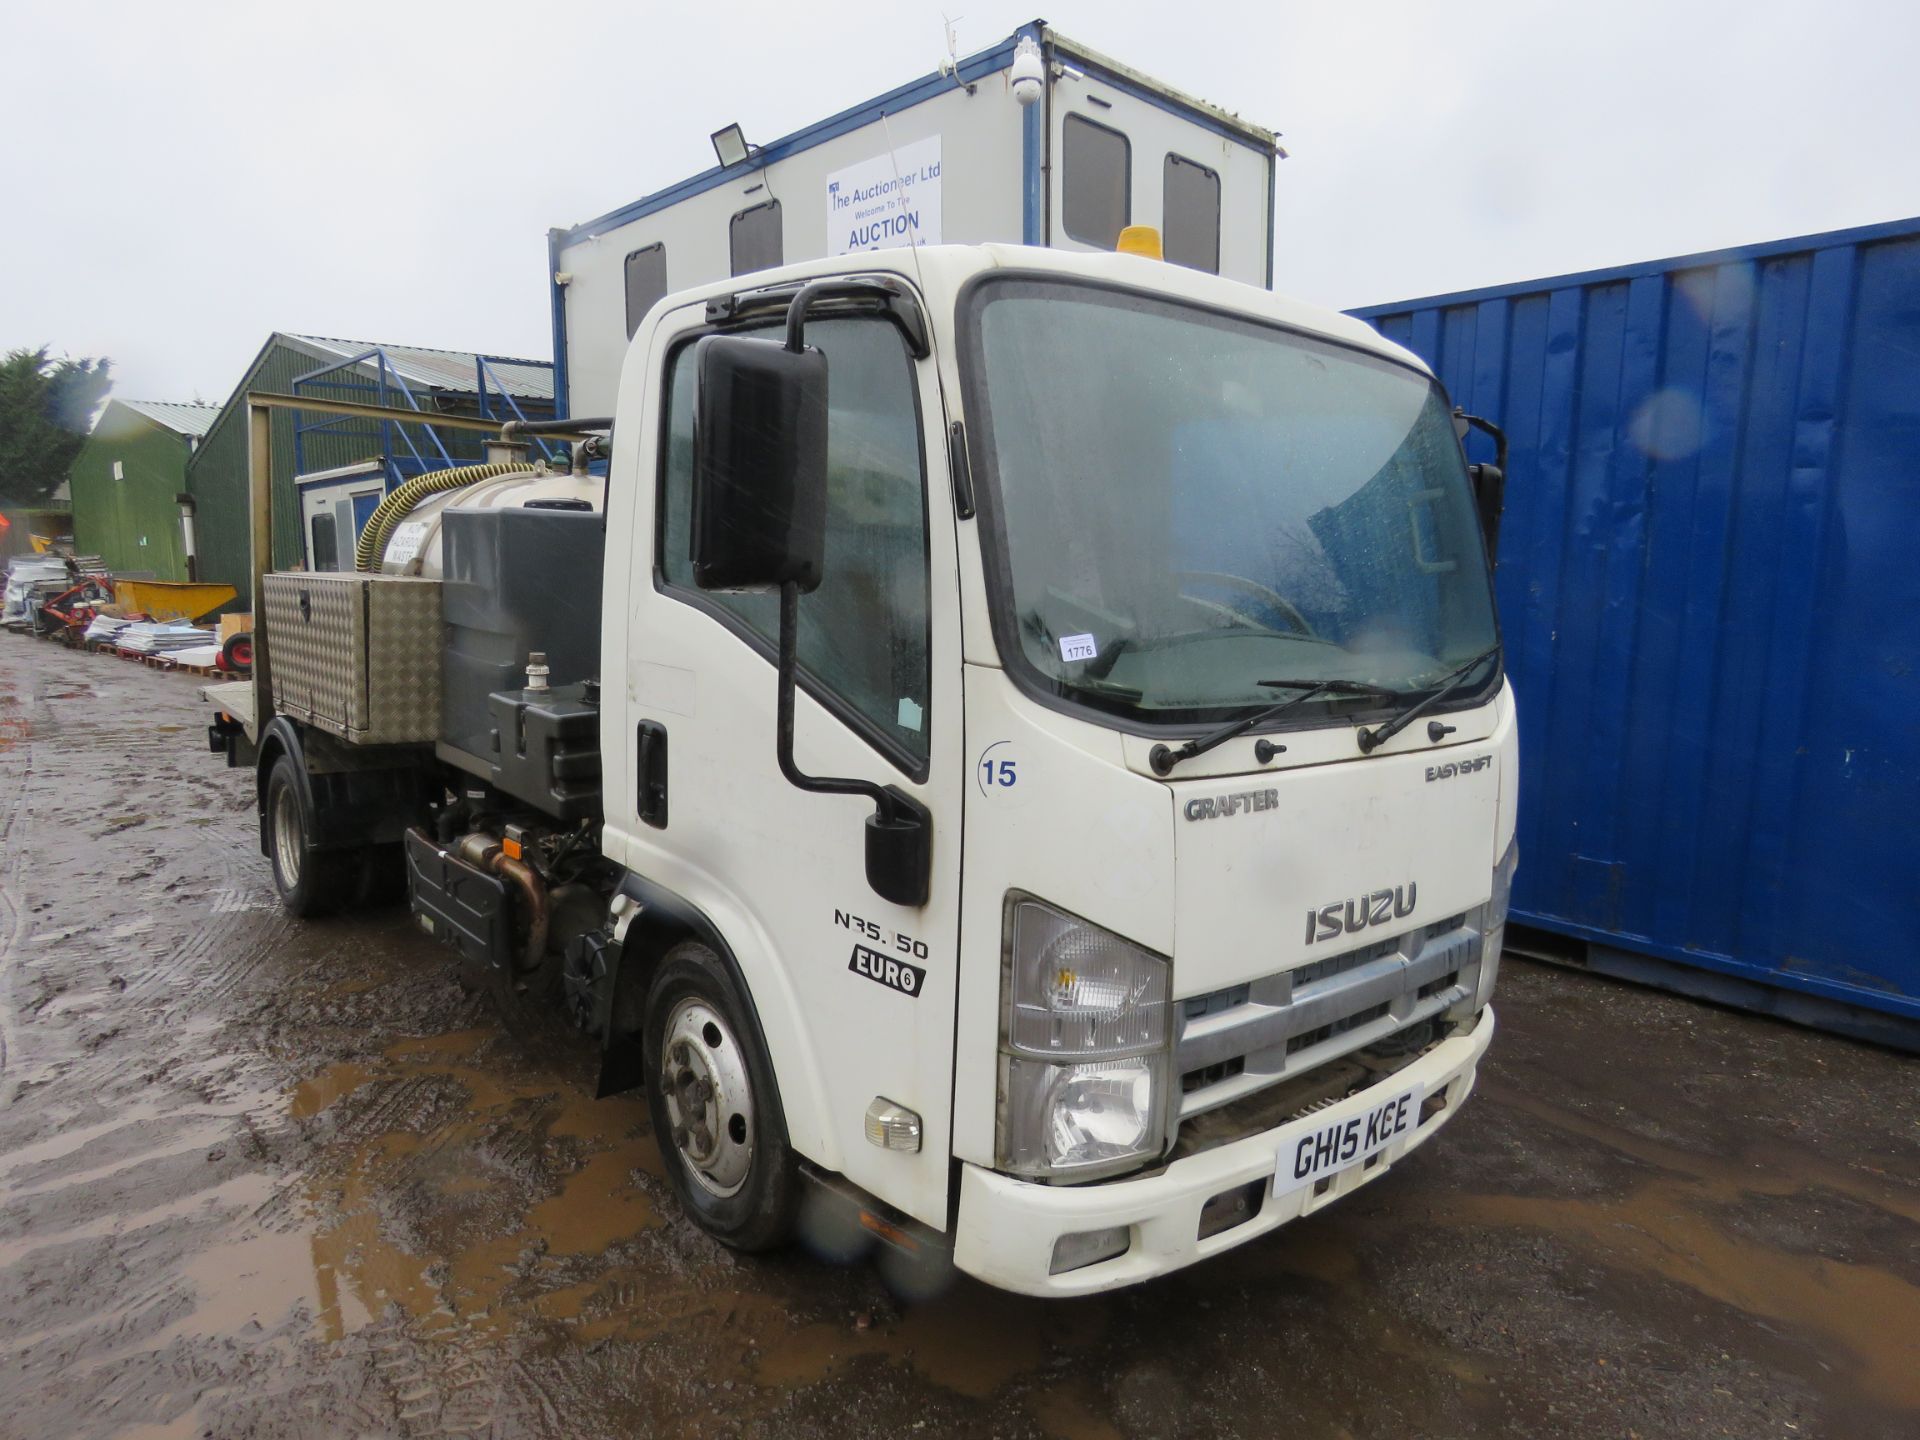 ISUZU N35.150 PORTABLE TOILET SERVICE VEHICLE TANKER TRUCK REG:GH15 KCE. 3500KG RATED CAPACITY. WITH